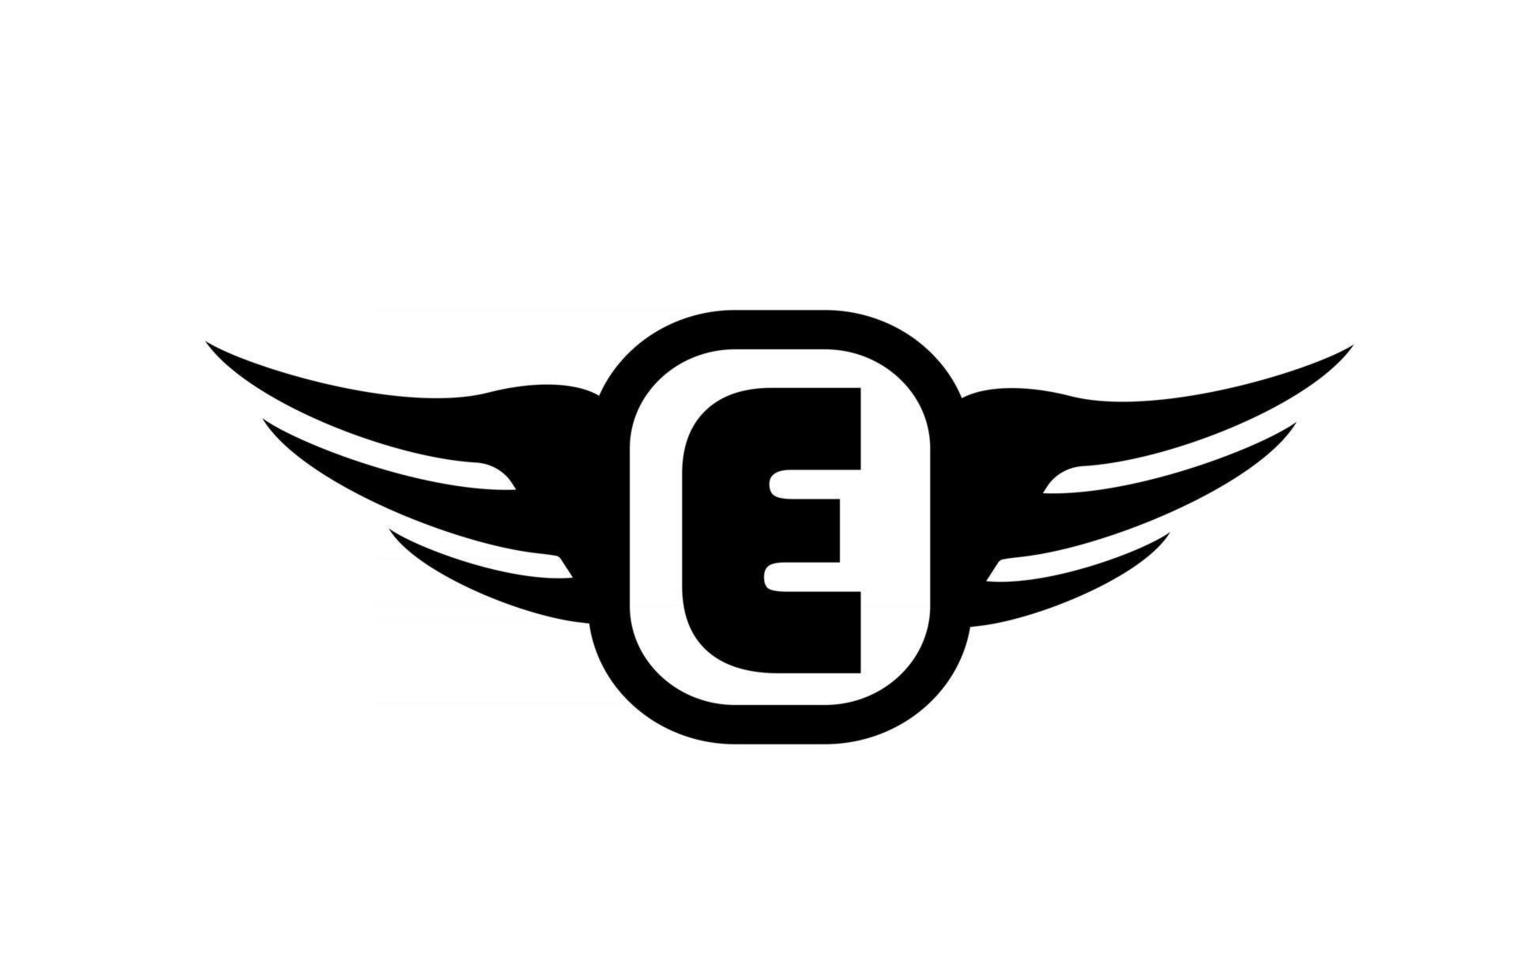 E alphabet letter logo for business and company with wings and black and white color. Corporate brading and lettering icon with simple design vector